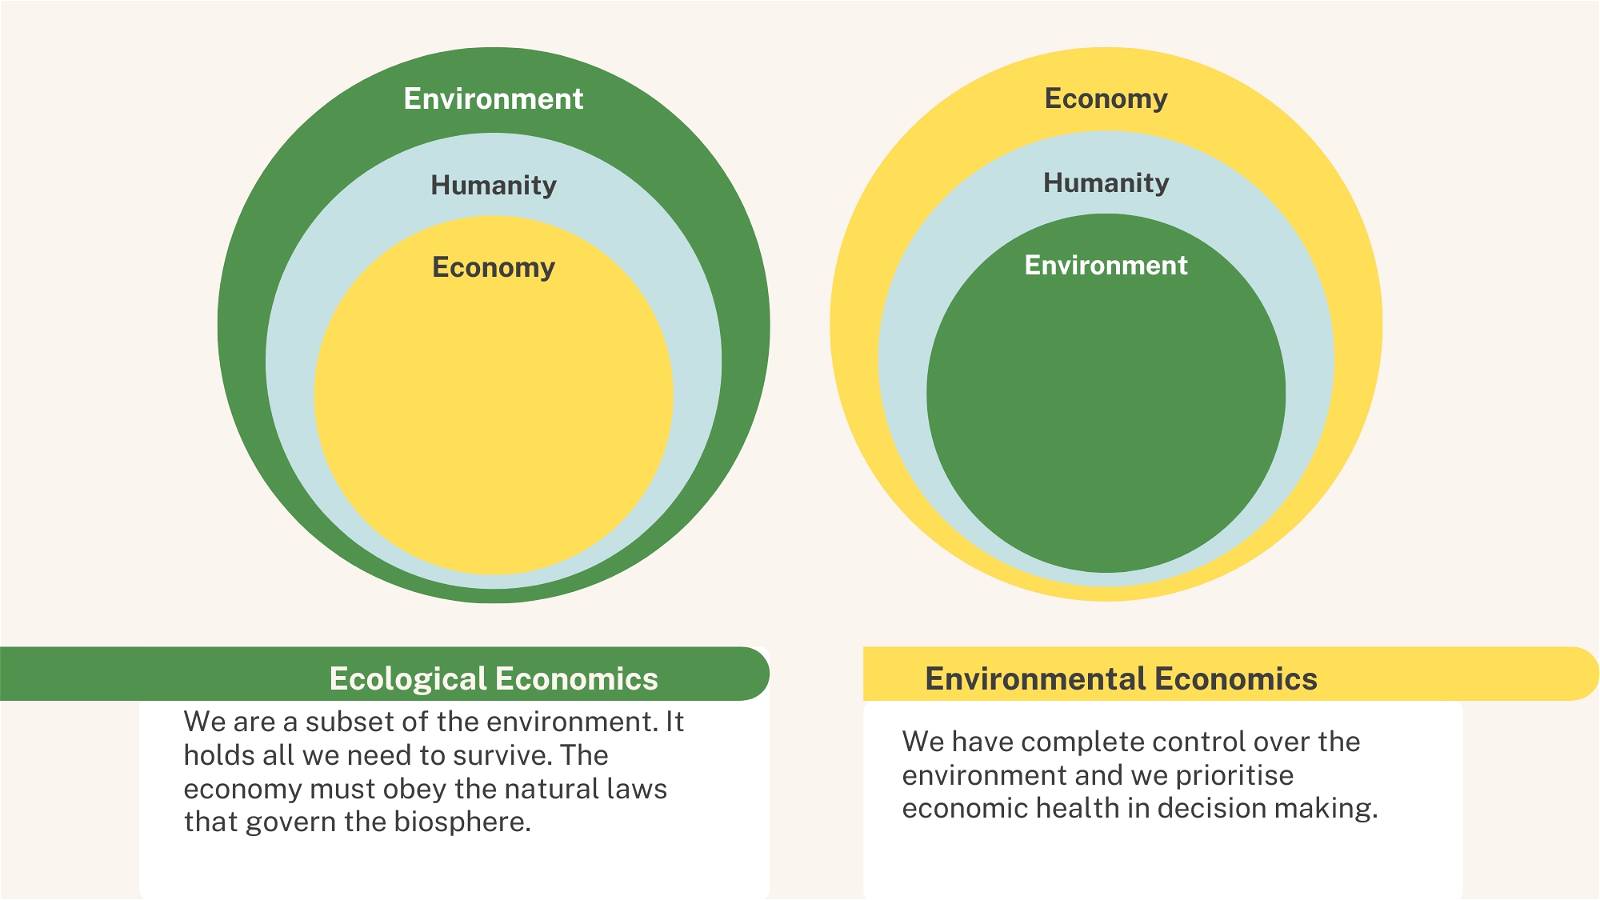 Rethinking the economy for the planet